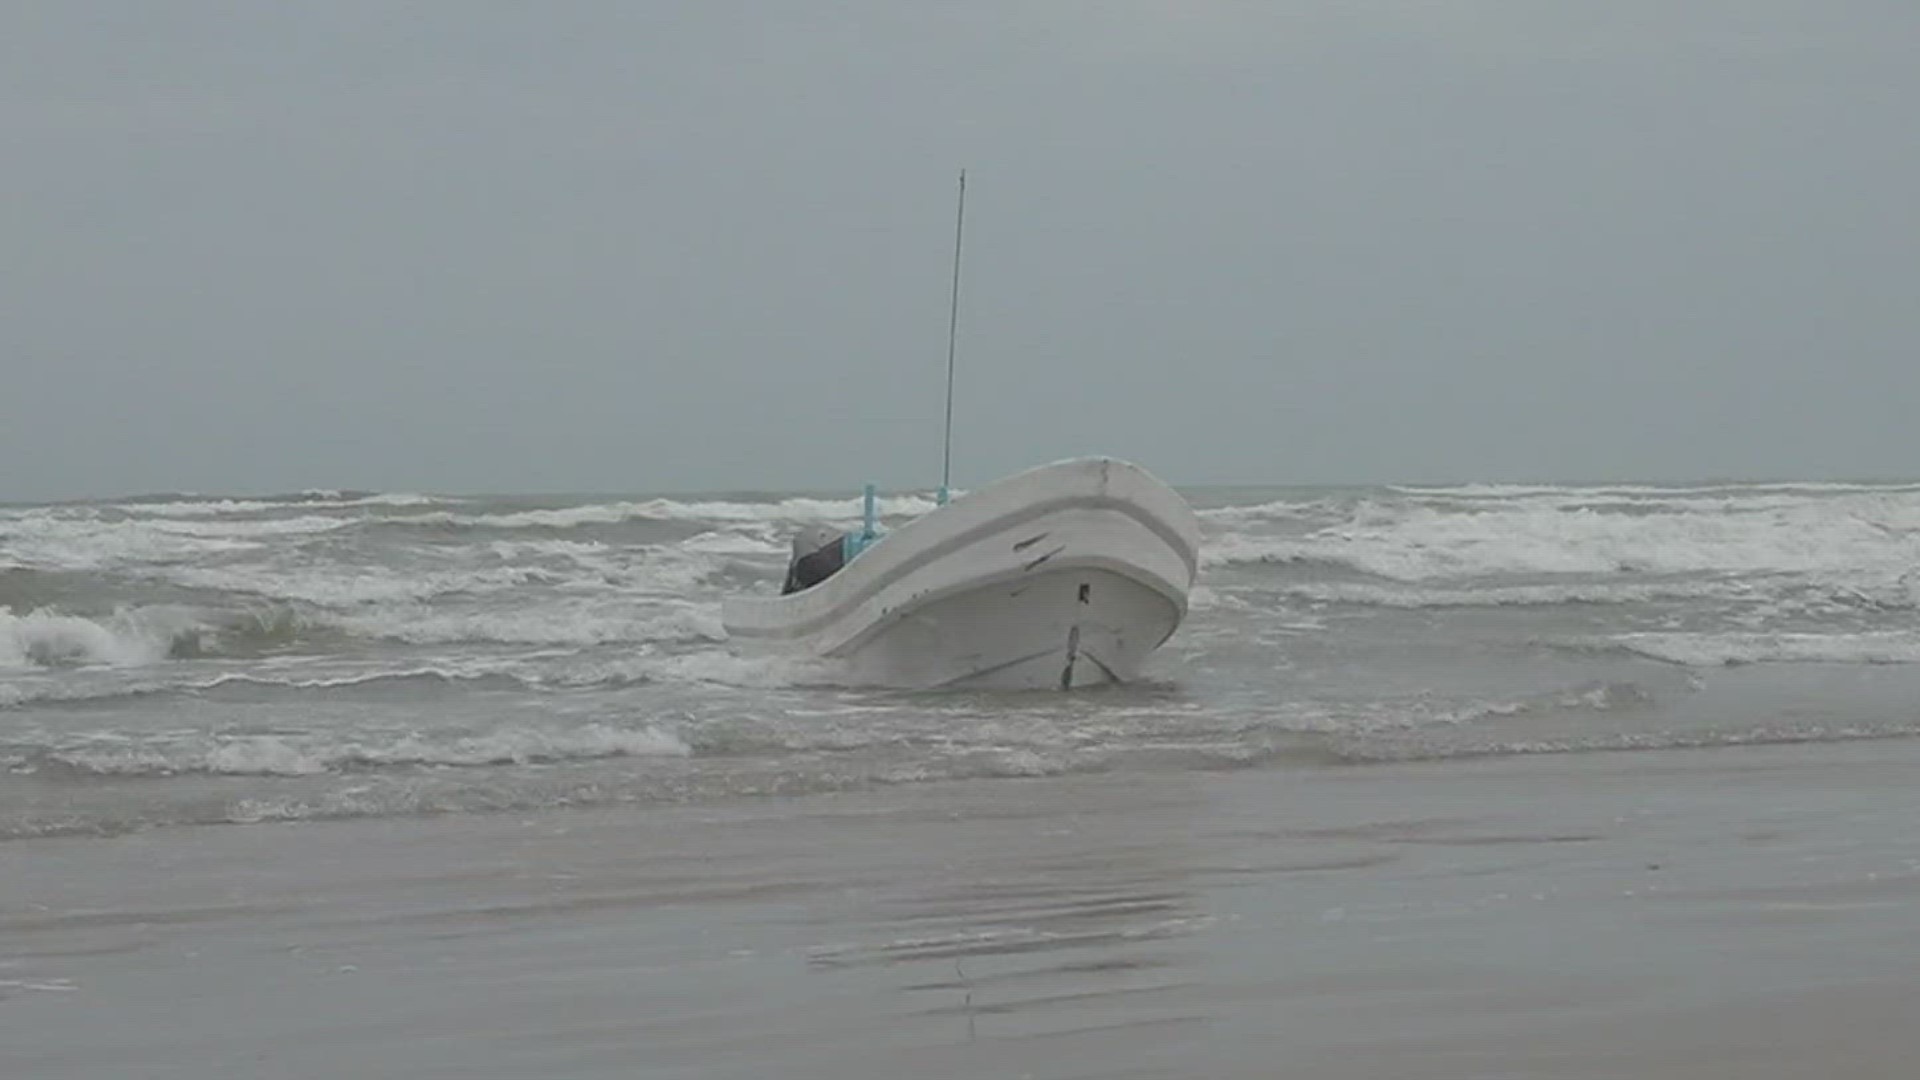 After it was cleared by officials, the boat was given to the man who initially came across it.